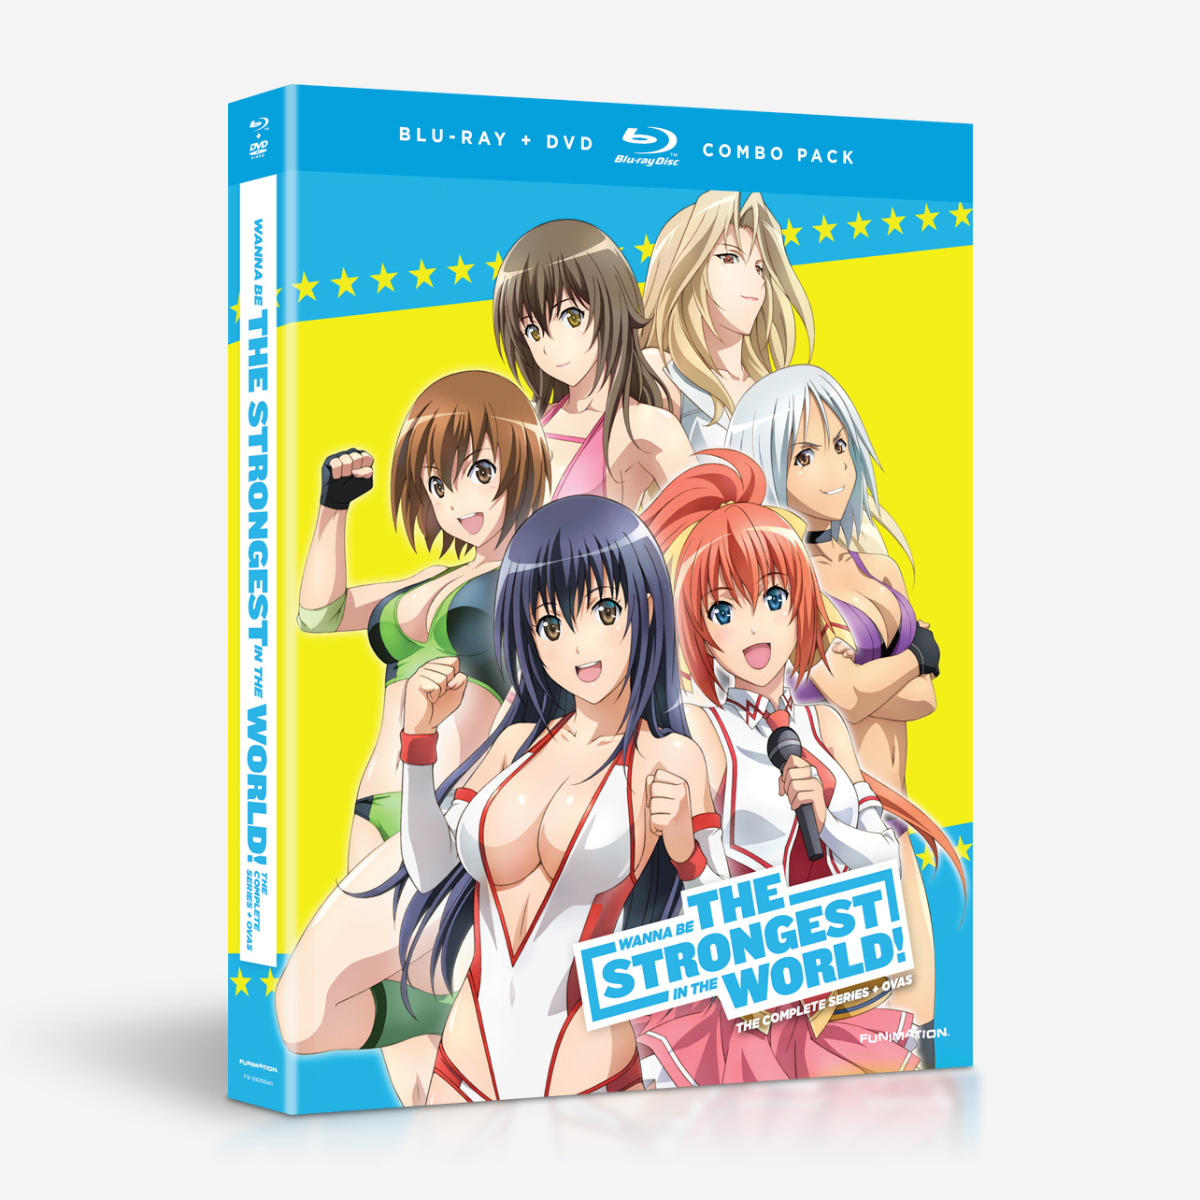 Wanna be the Strongest in the World! - The Complete Series - Blu-ray + DVD image count 0